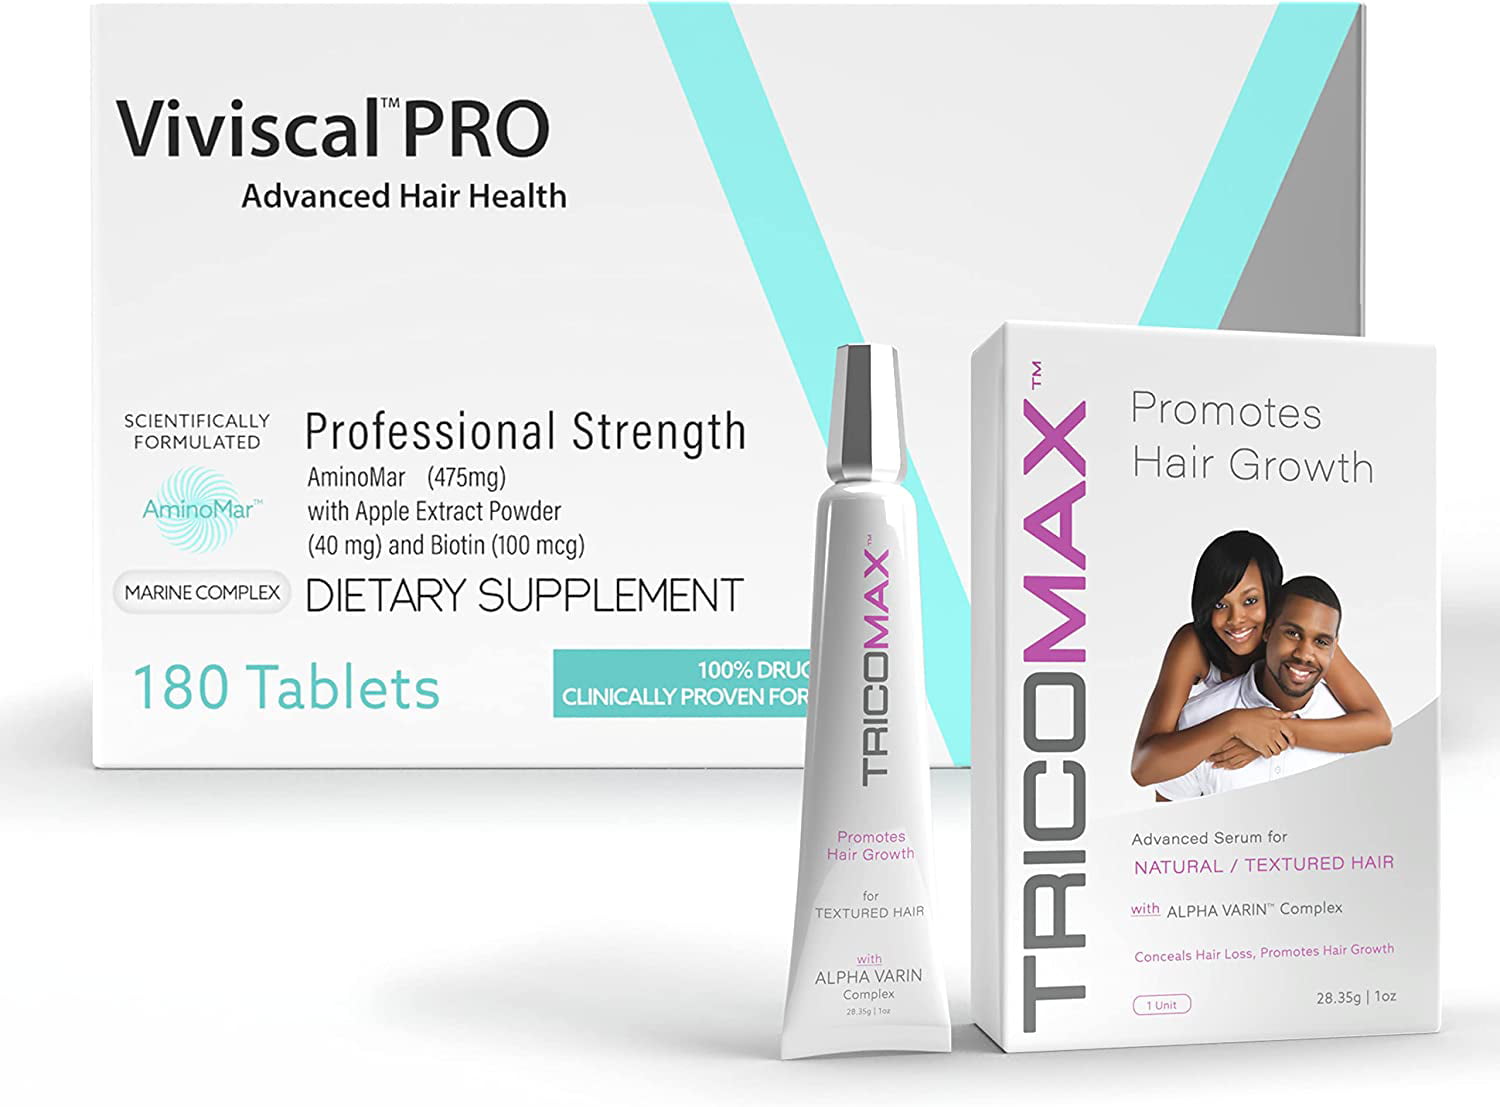 Tricomax – Growth Serum for Textured Hair 1 Oz – ALPHA VARIN Complex with  Healing Hemp Extract + Professional Hair Growth Supplement 180  Tablets-Promotes Growth & Healthy Scalp – Curls, Coils & Waves 